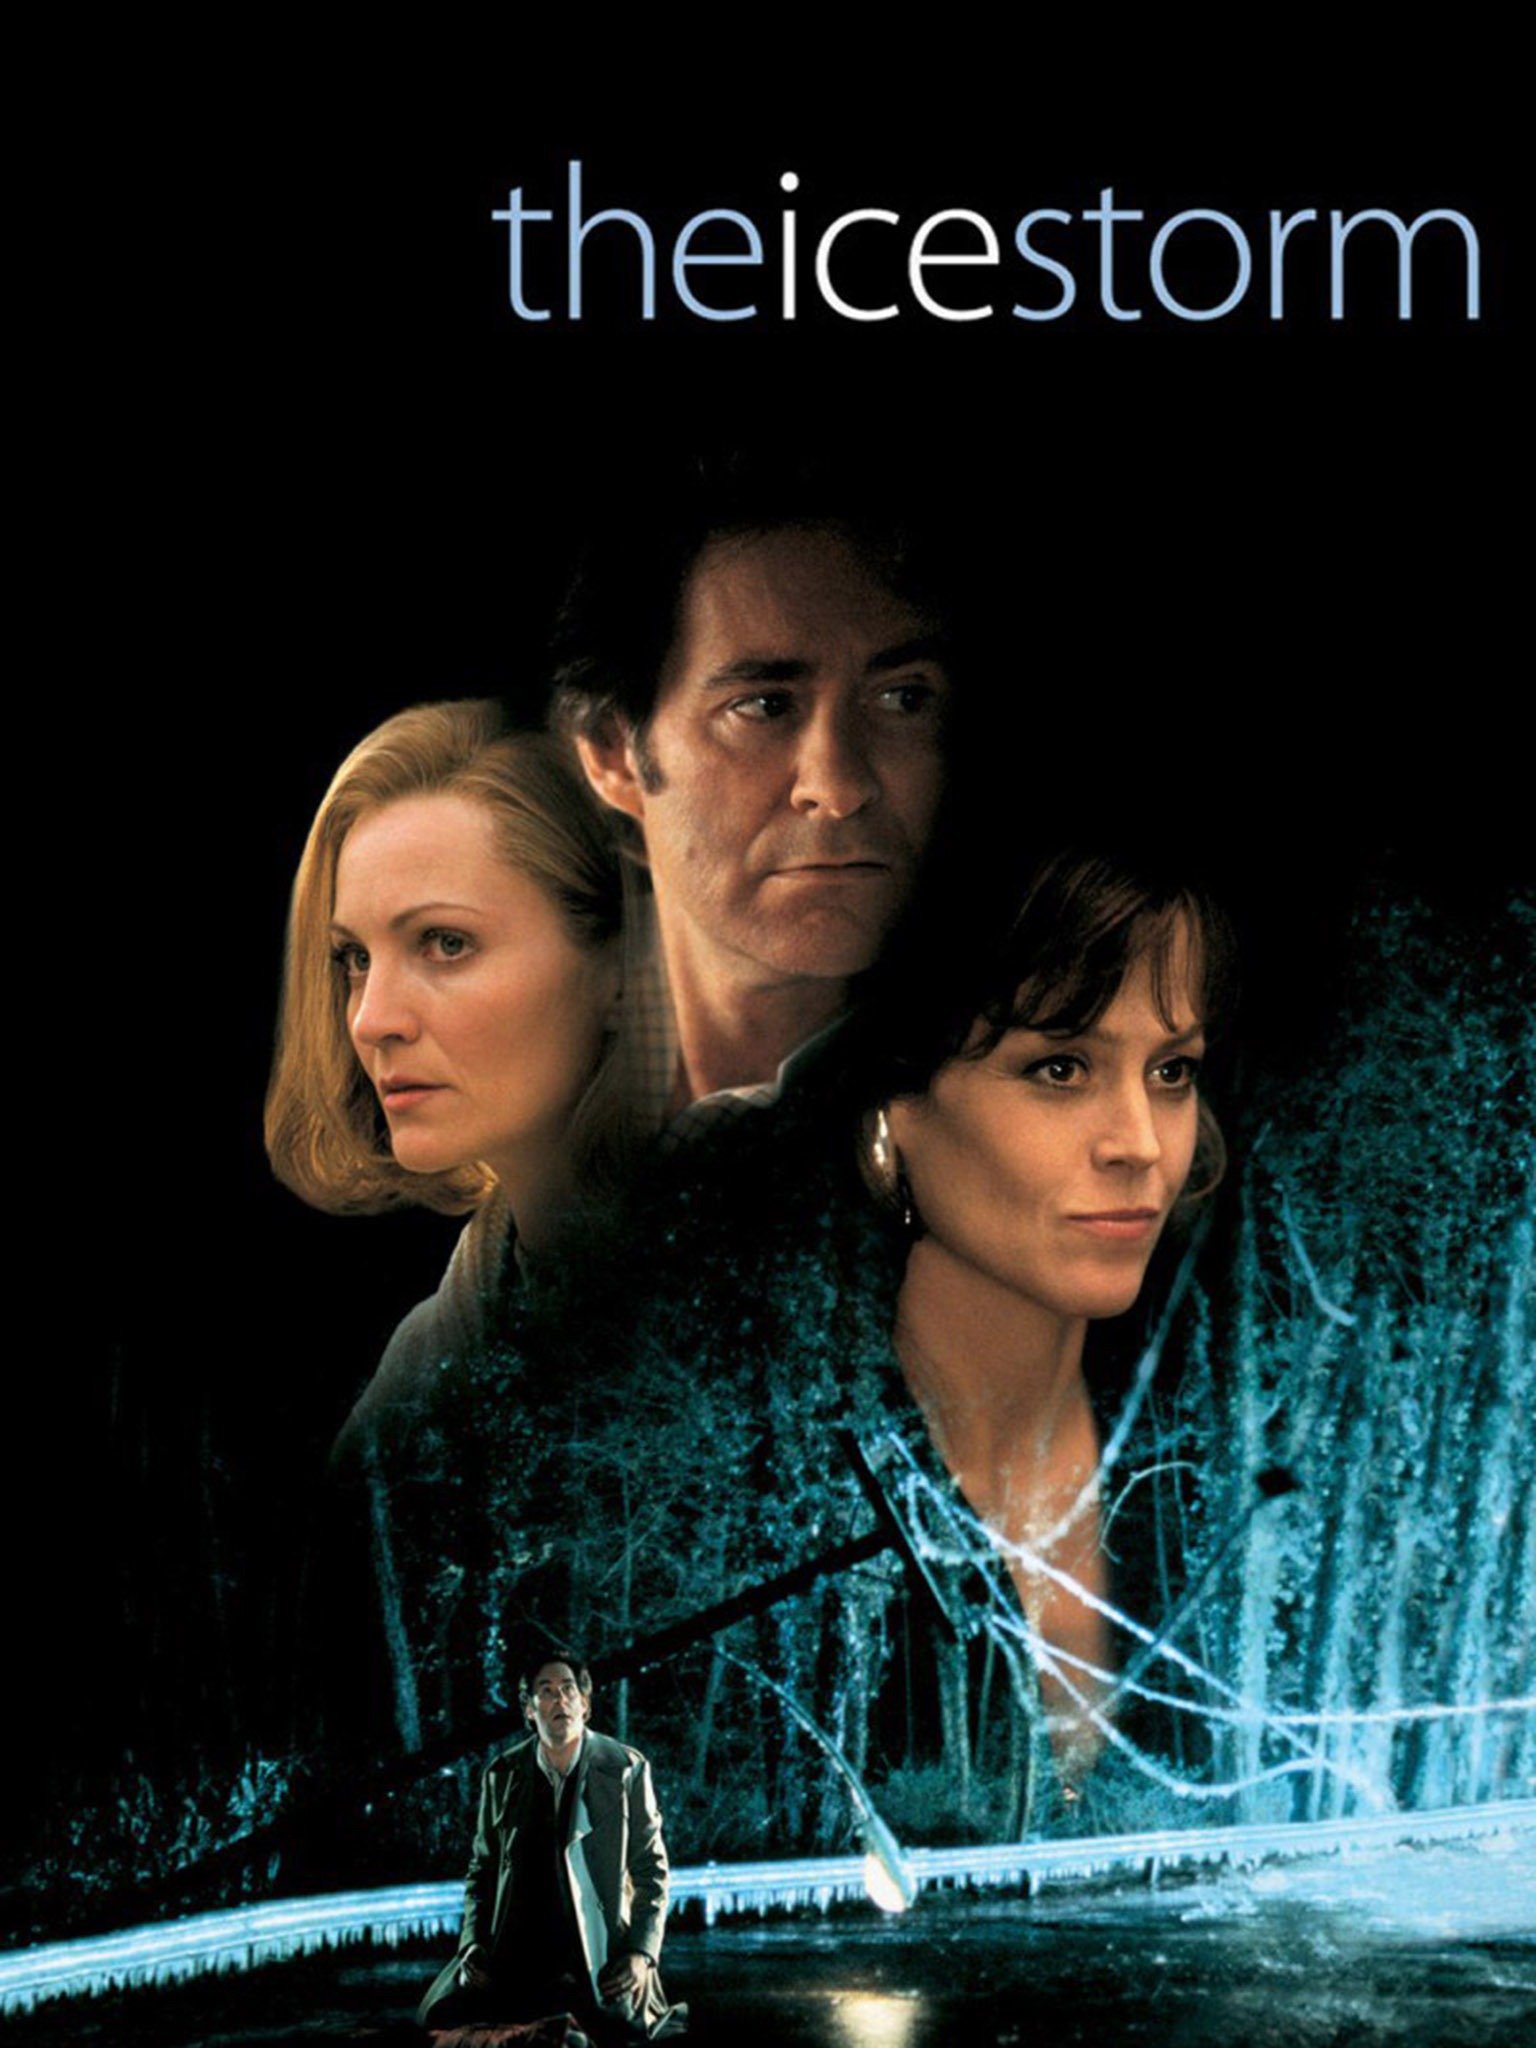 The Ice Storm Trailer 1 Trailers & Videos Rotten Tomatoes